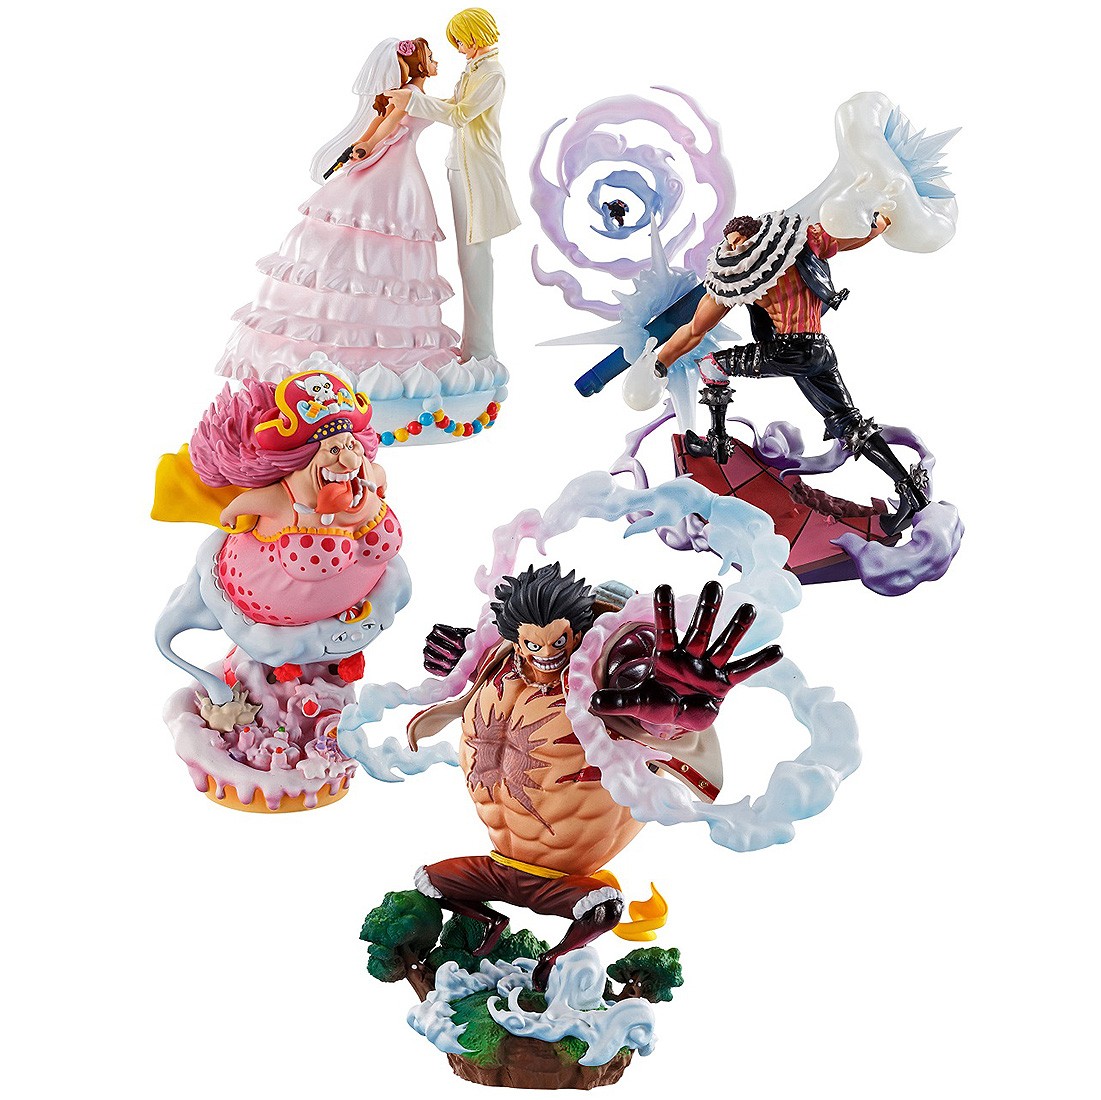 MegaHouse One Piece Logbox Re:Birth Whole Cake Island Ver. Limited Box Set of 4 Figures (multi)